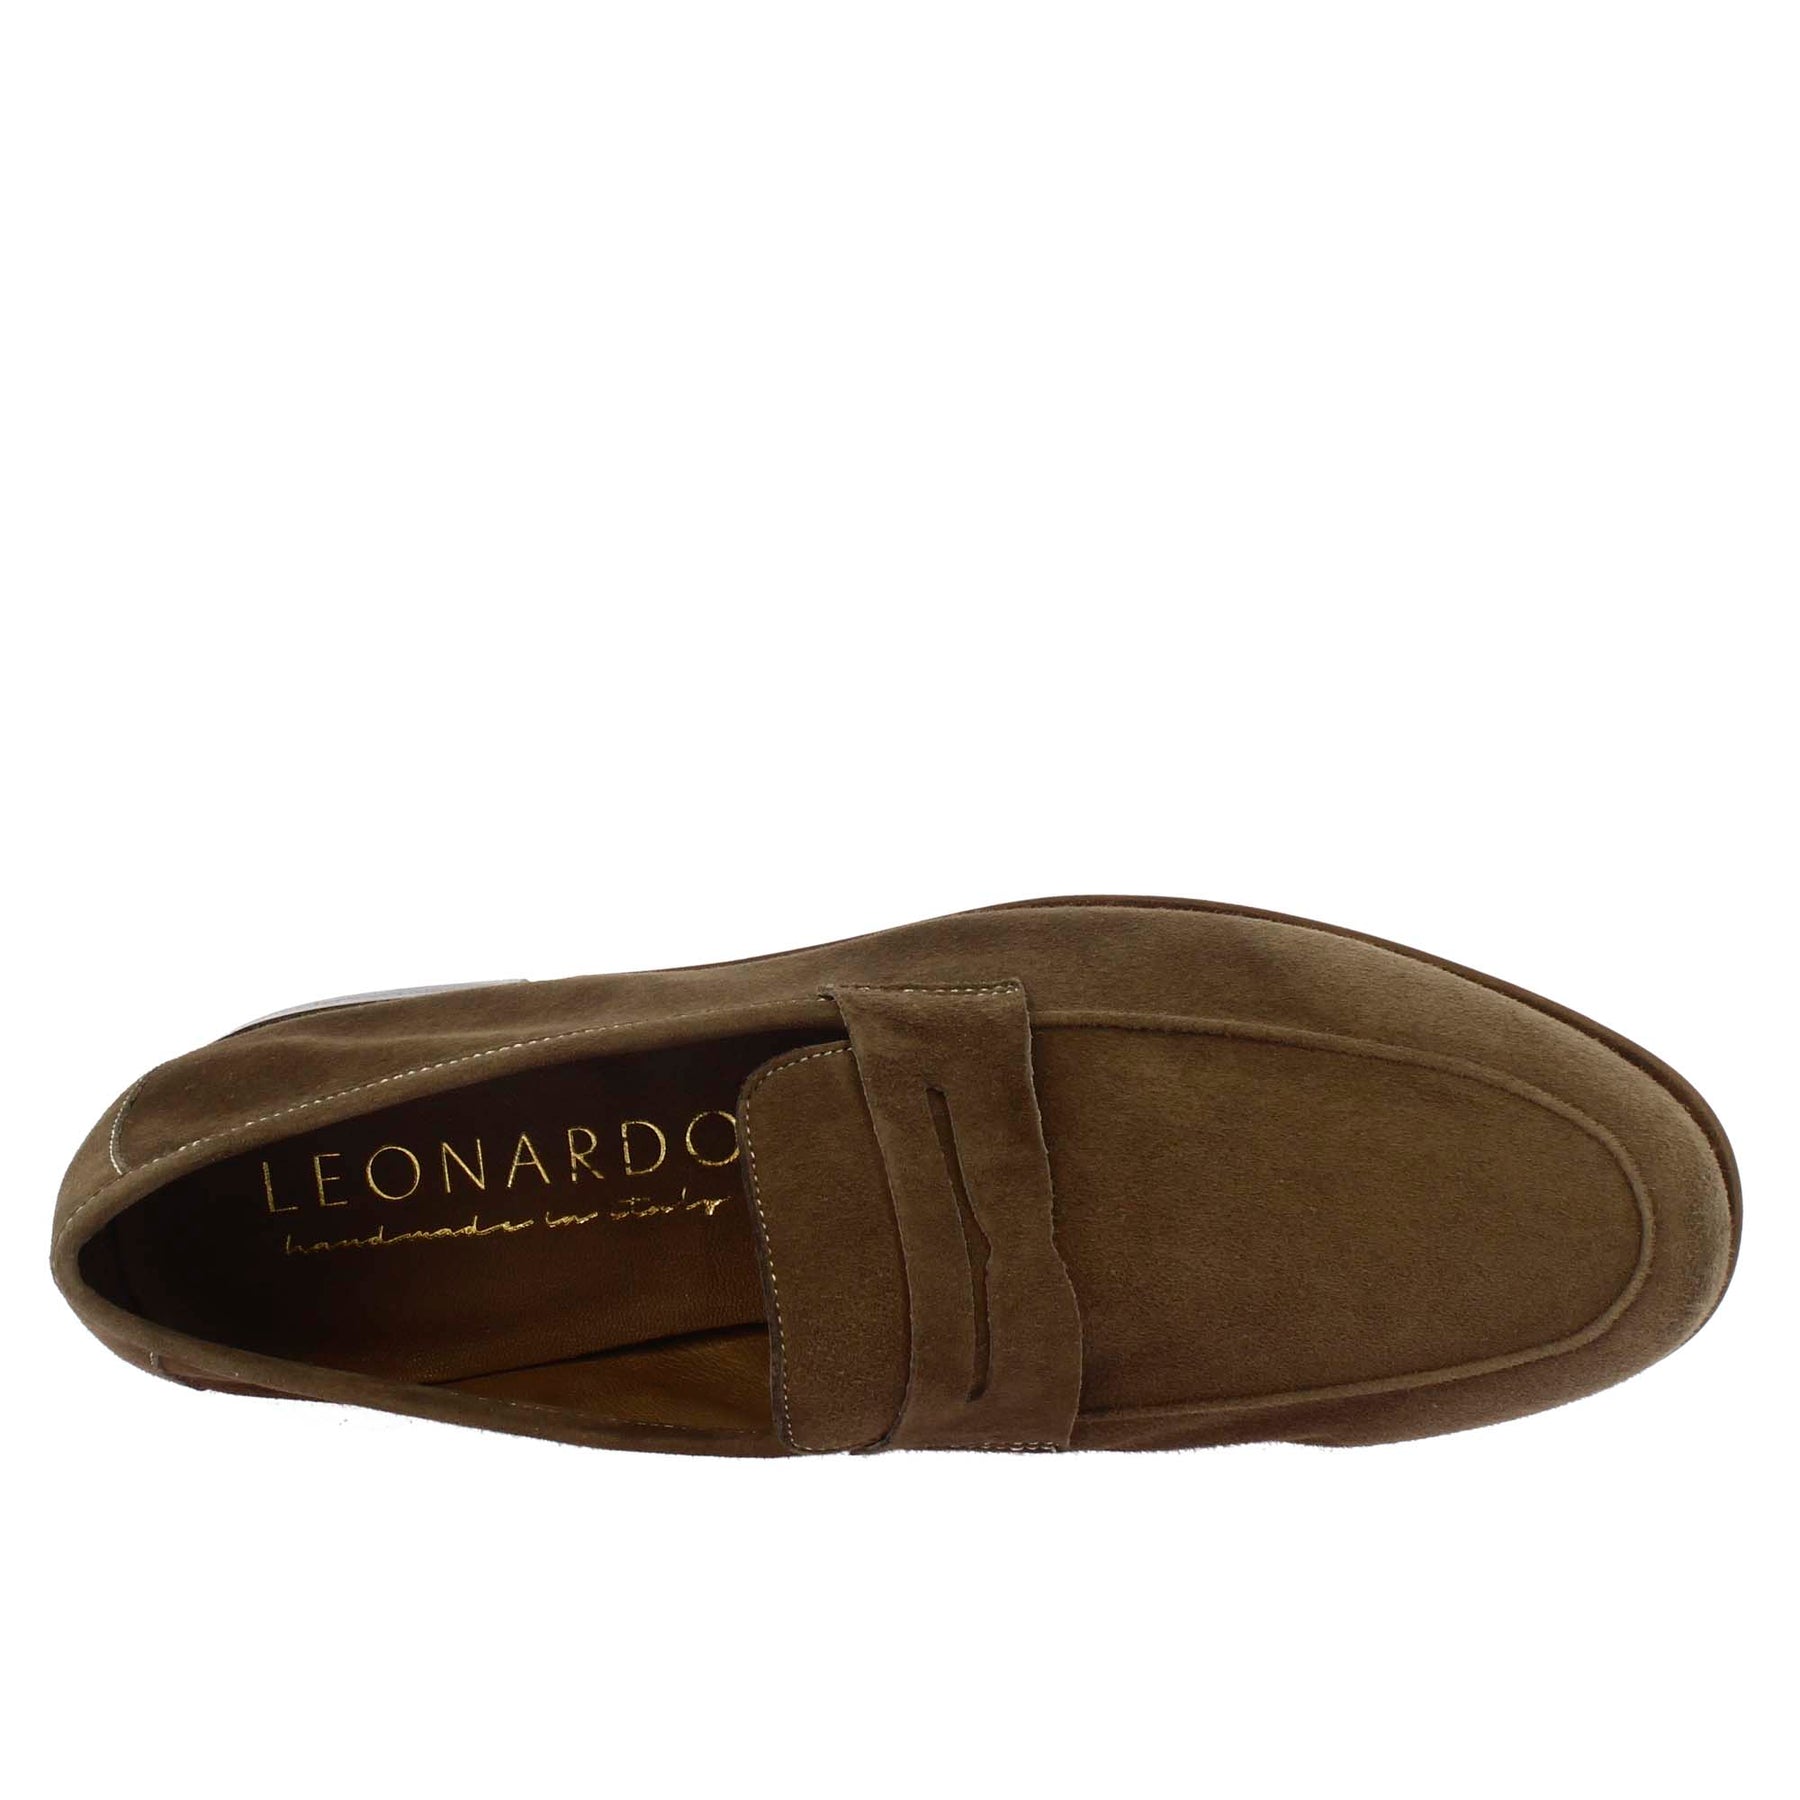 Handmade men's slip-on loafers in taupe suede leather